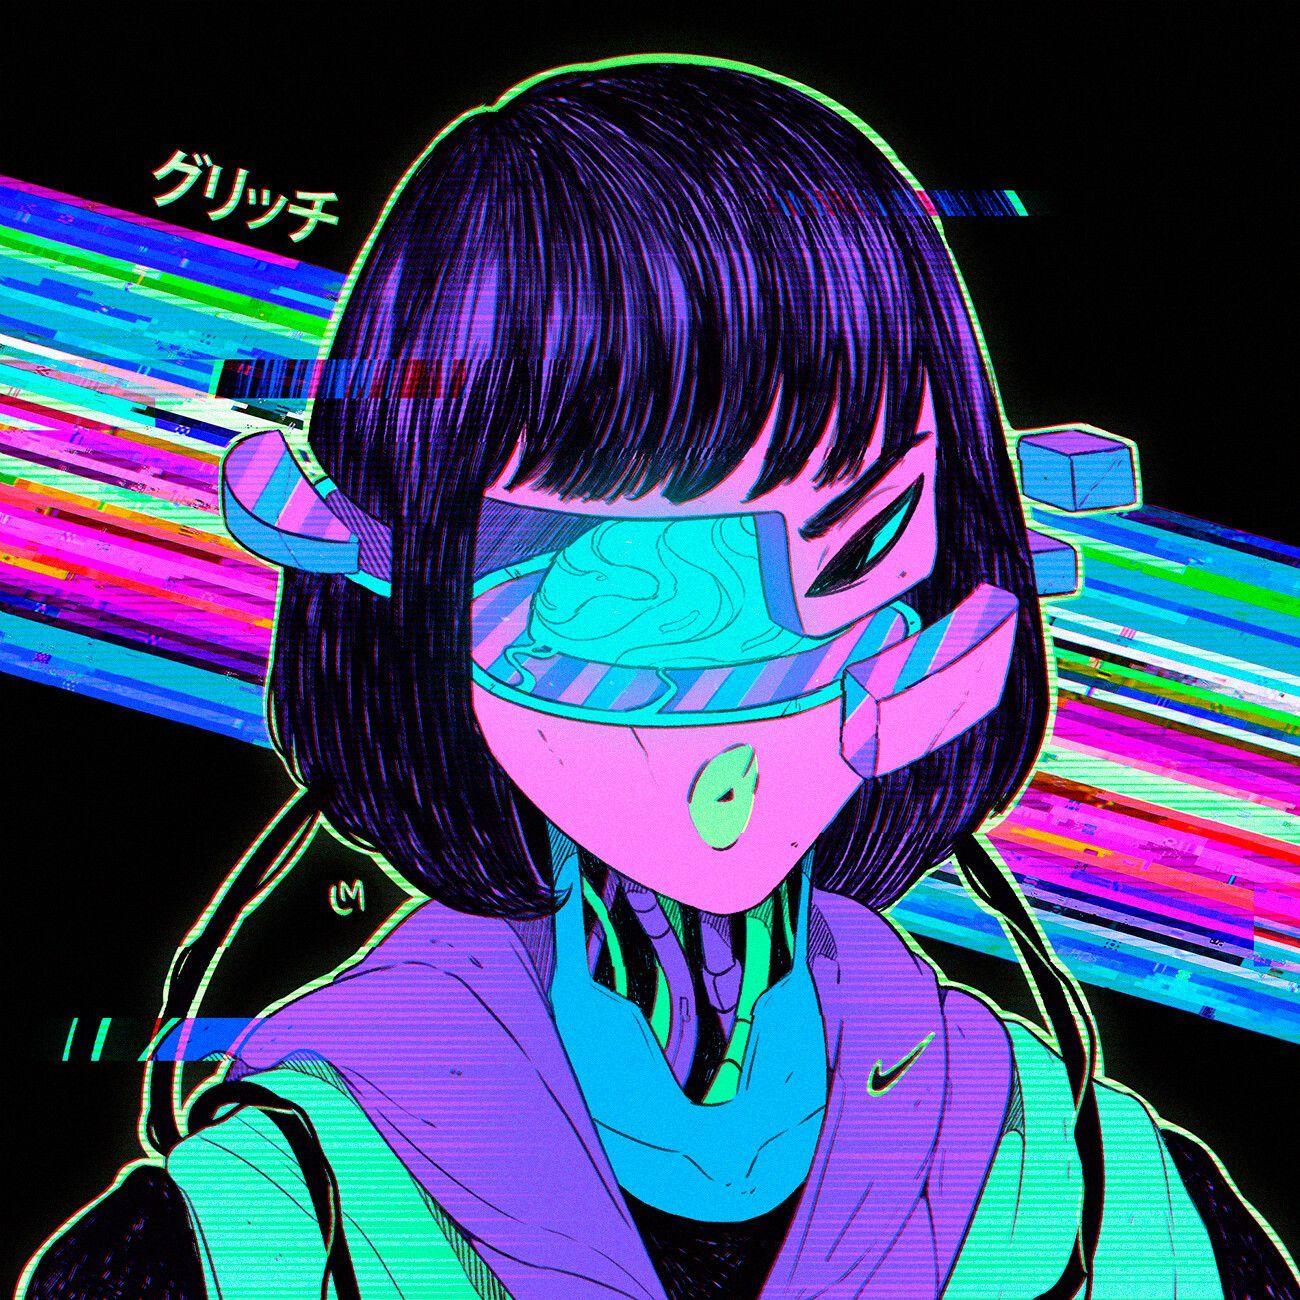 1300 x 1300 · jpeg - Casual Vaporwave Girls - Style and Color Study, Lucas Mendonca # ...